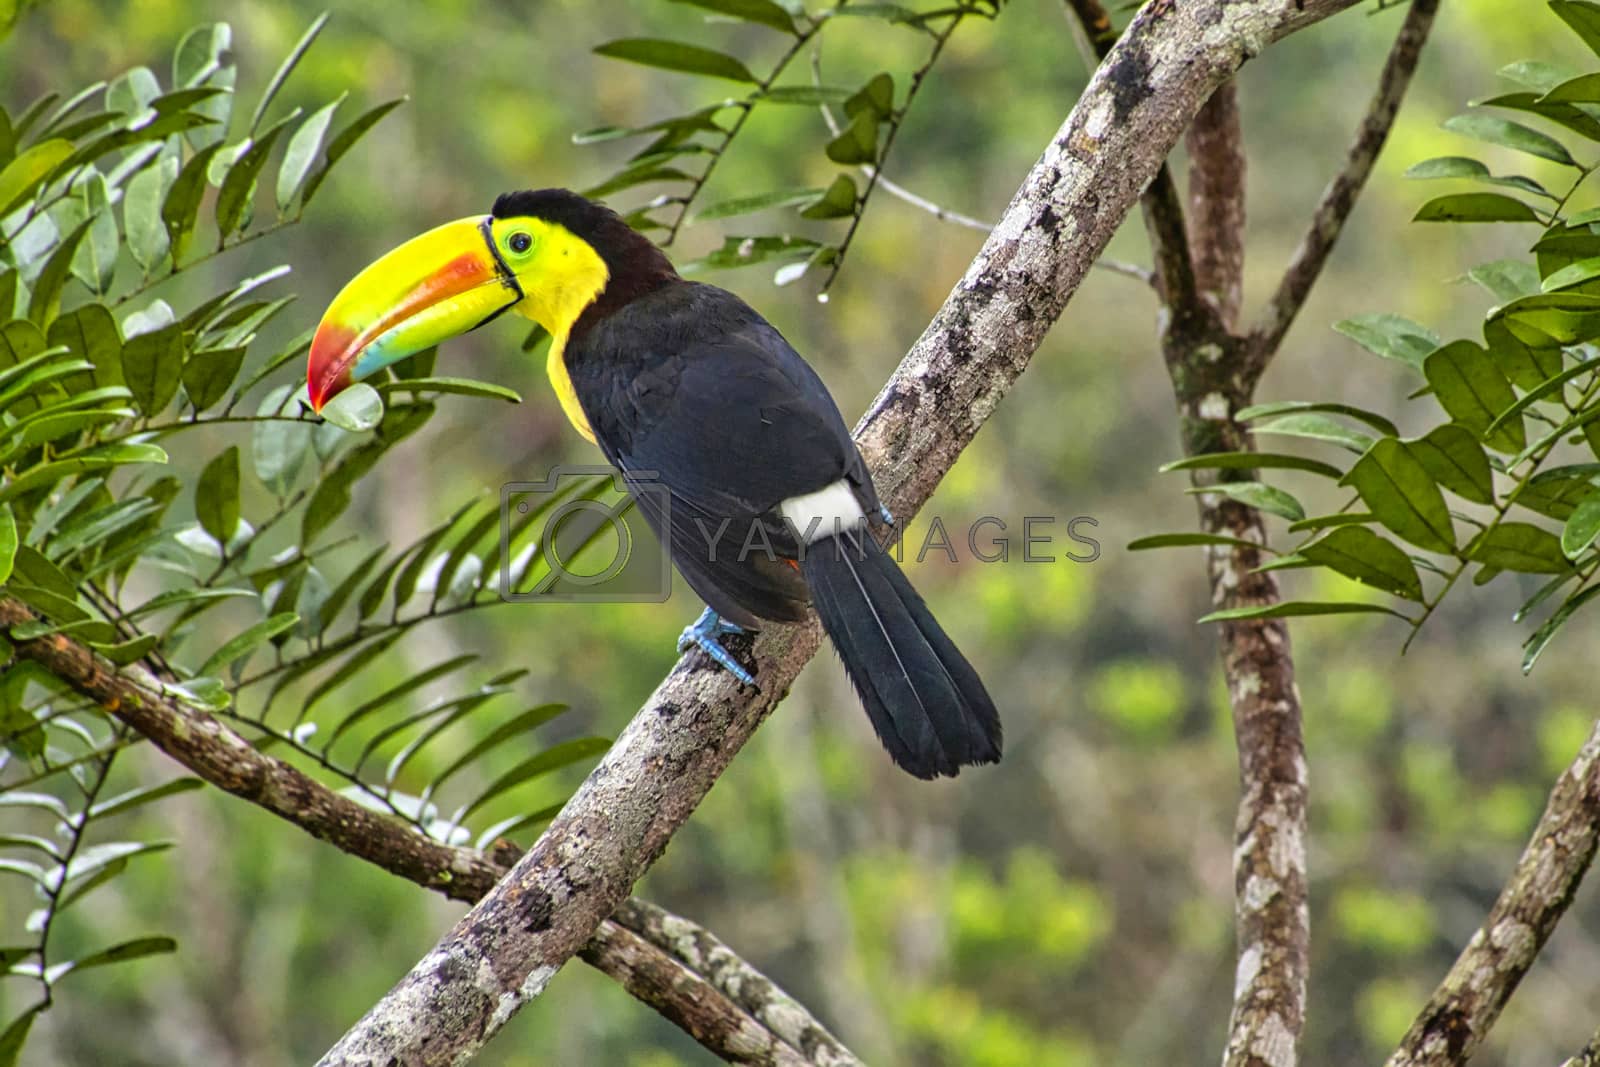 Royalty free image of Keel-billed Toucan, Tropical Rainforest, Costa Rica by alcaproac